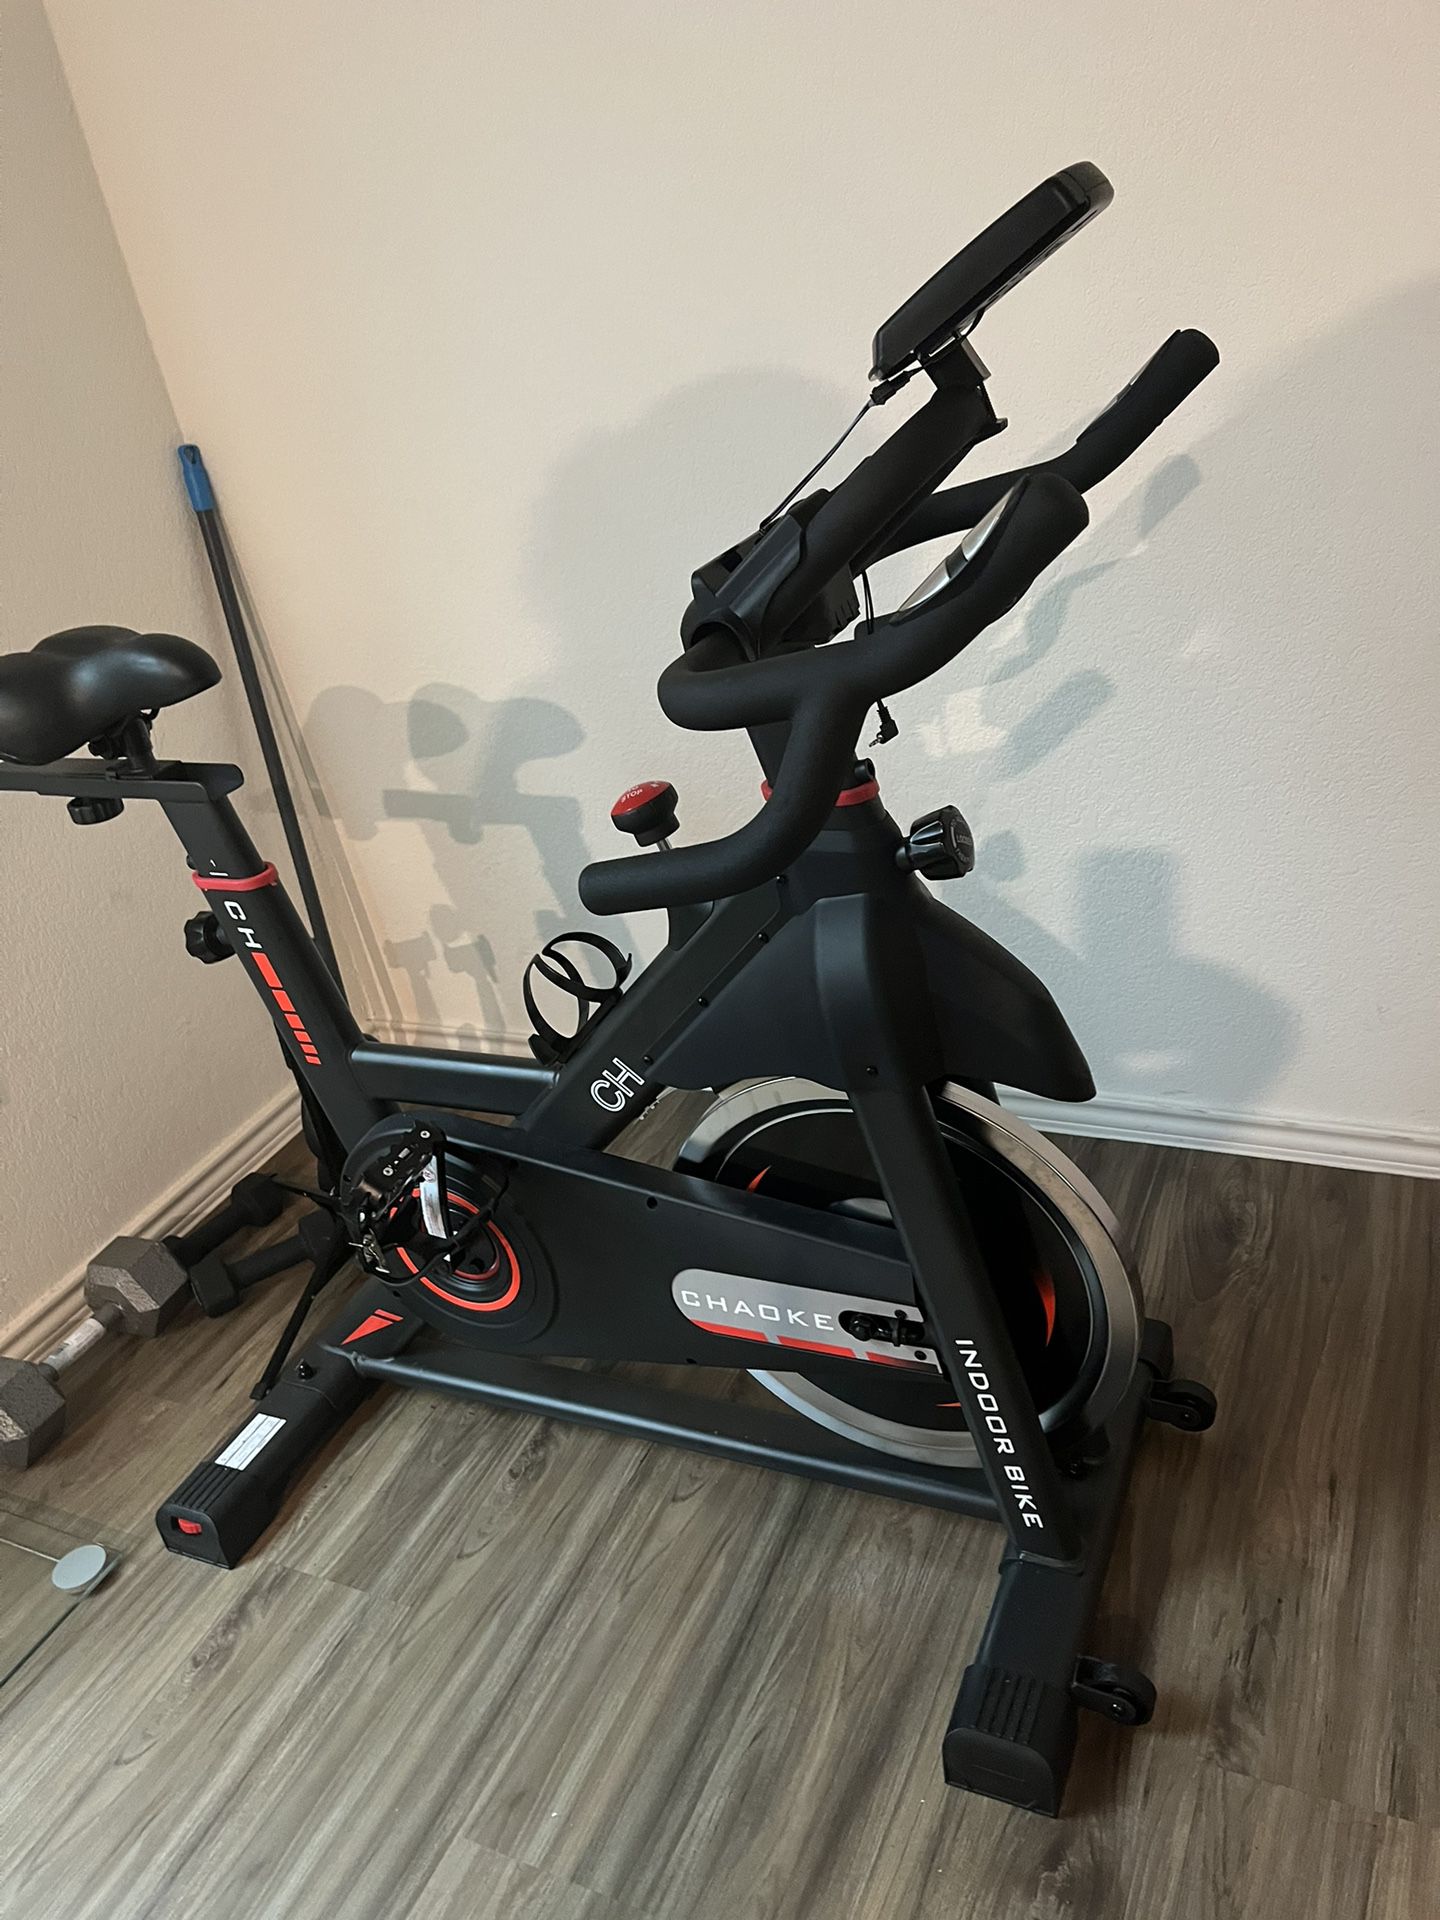 Exercise Bike. PICKUP ONLY